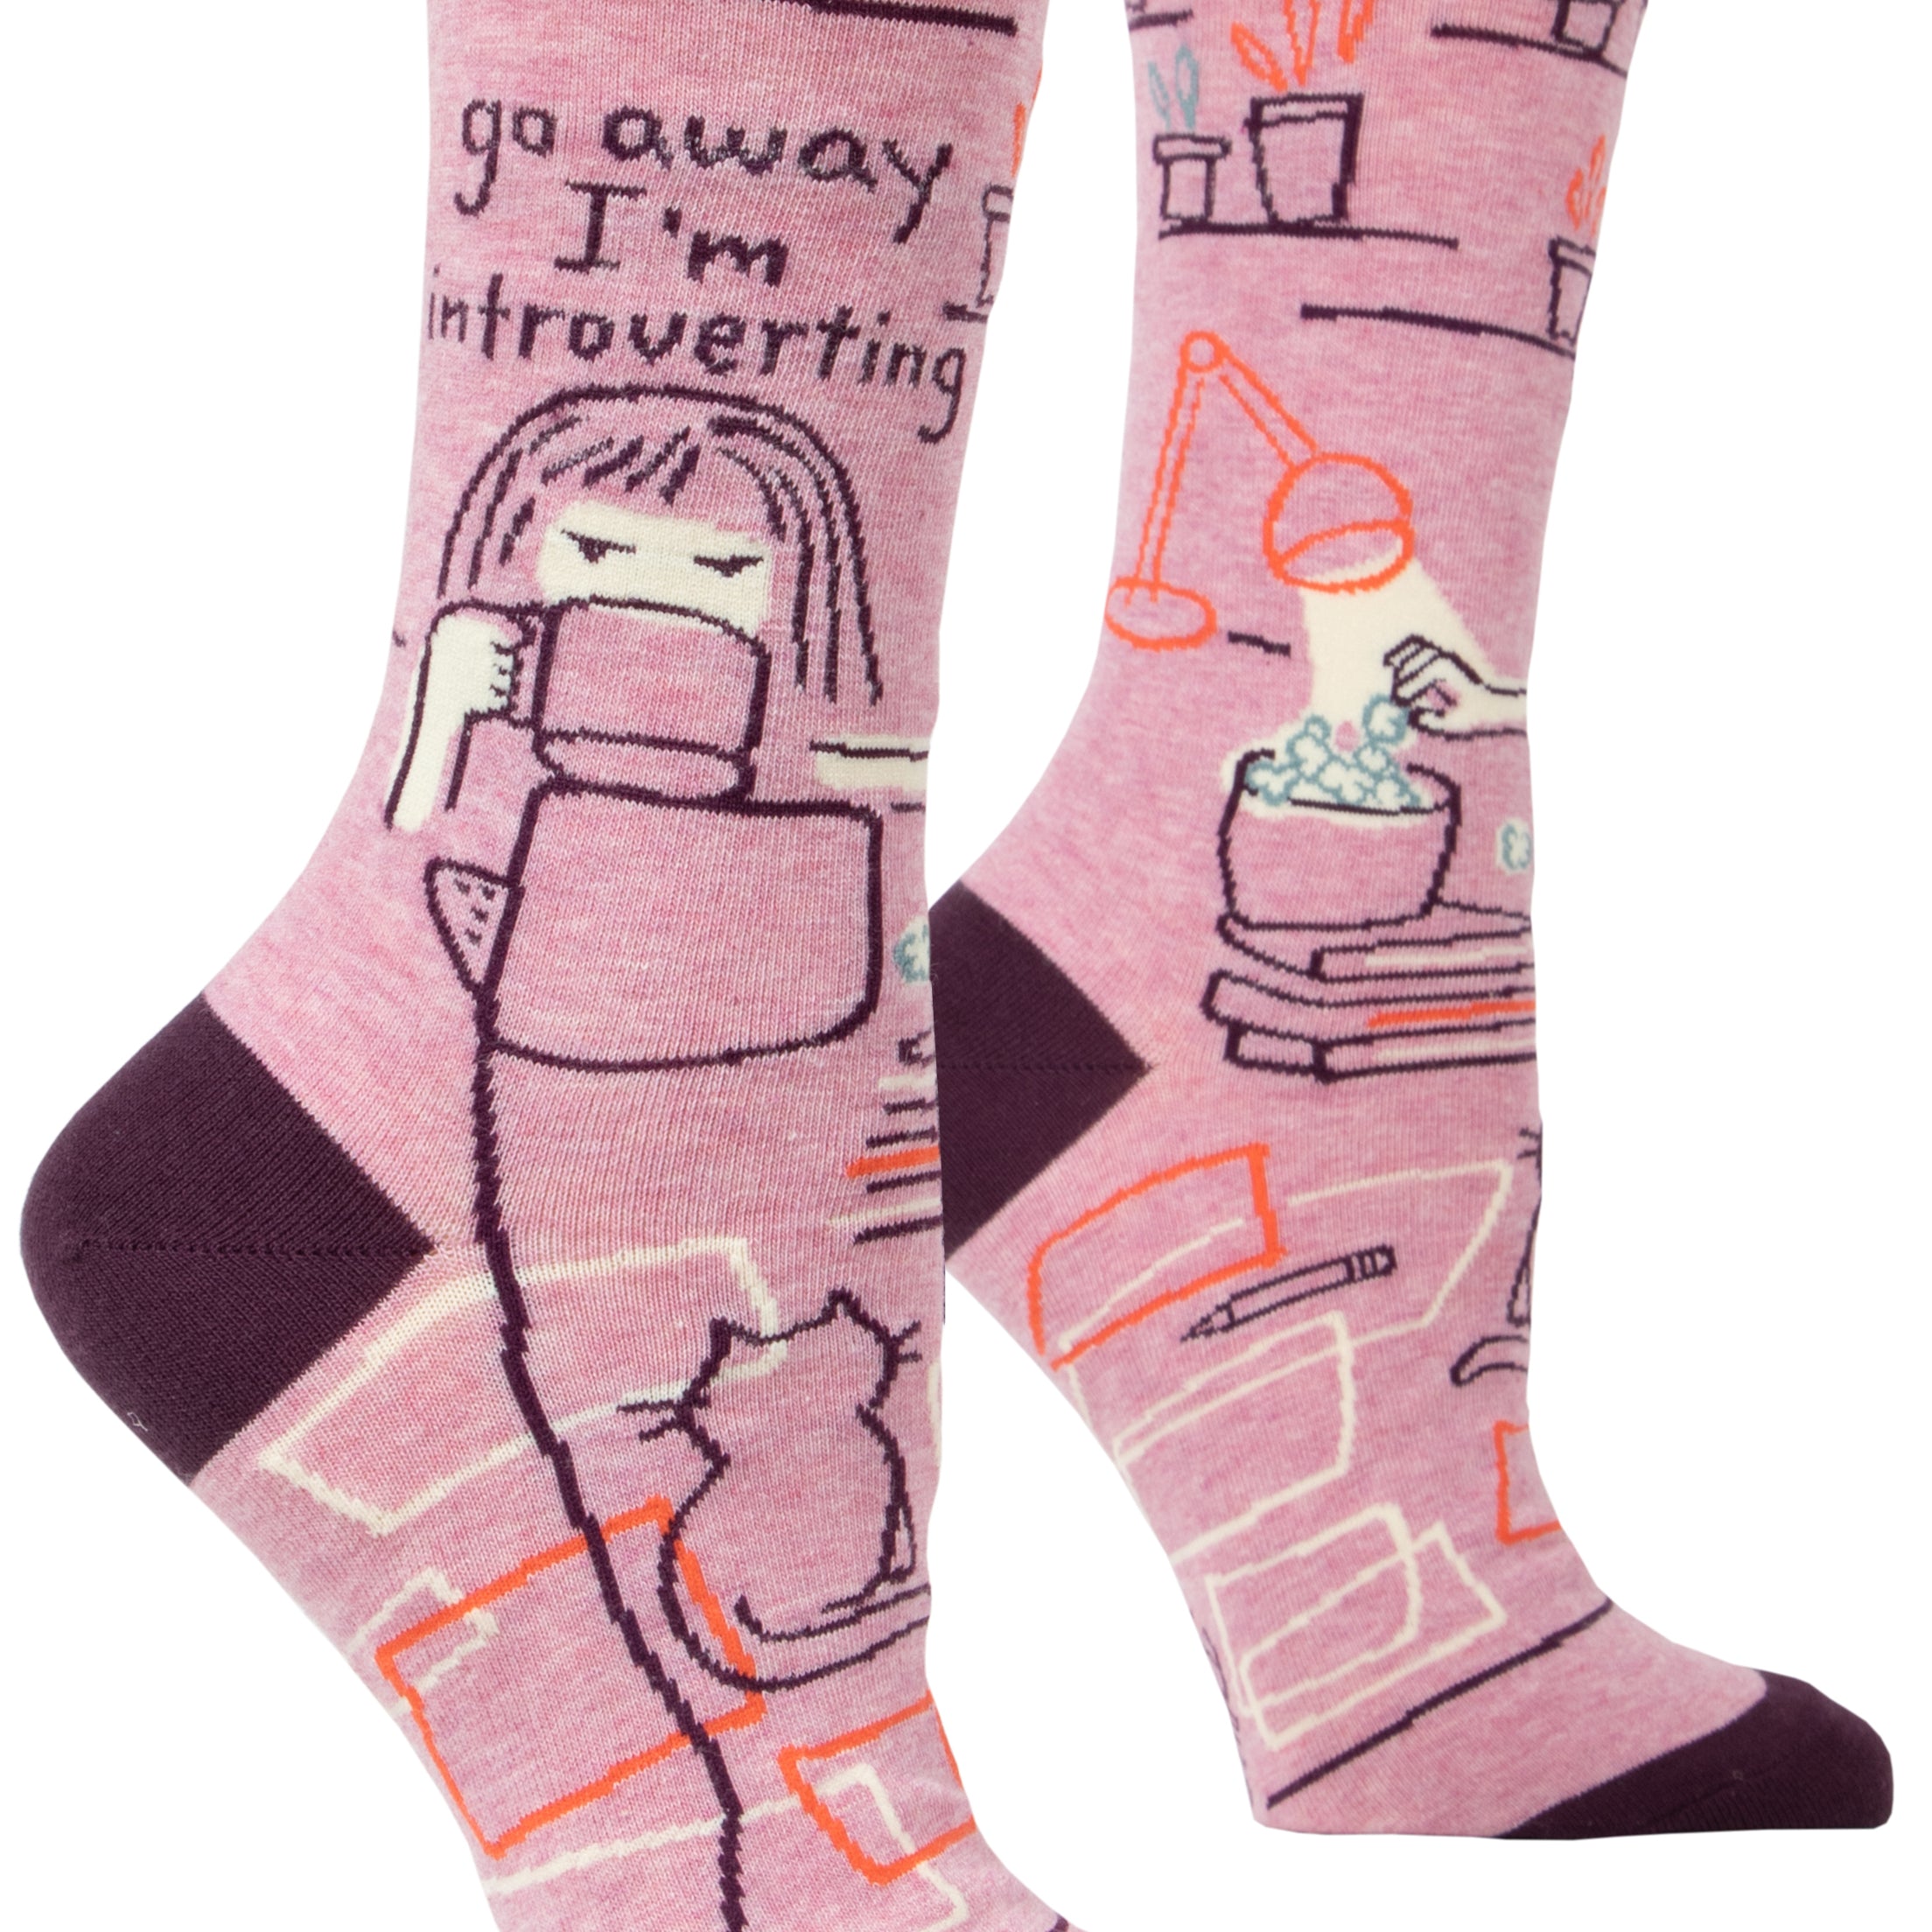 pink socks with cartoon of person as desk with popcorn books, lamp cat and plants on ankle it says go away i'm introverting 